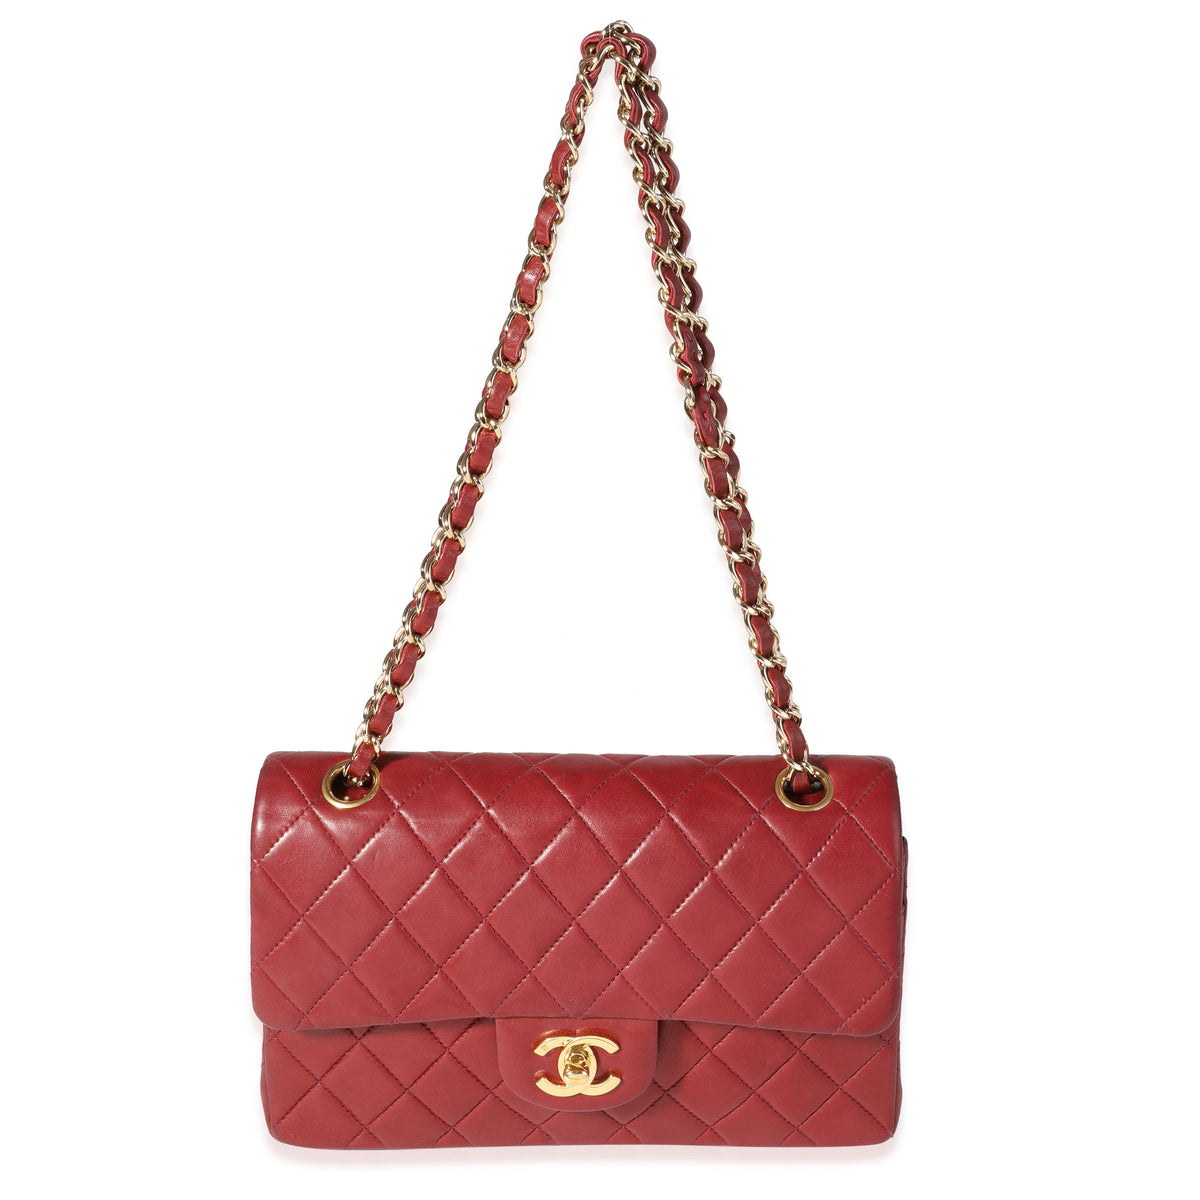 Authentic Chanel Classic Jumbo Red Chevron Lambskin Double Flap GHW